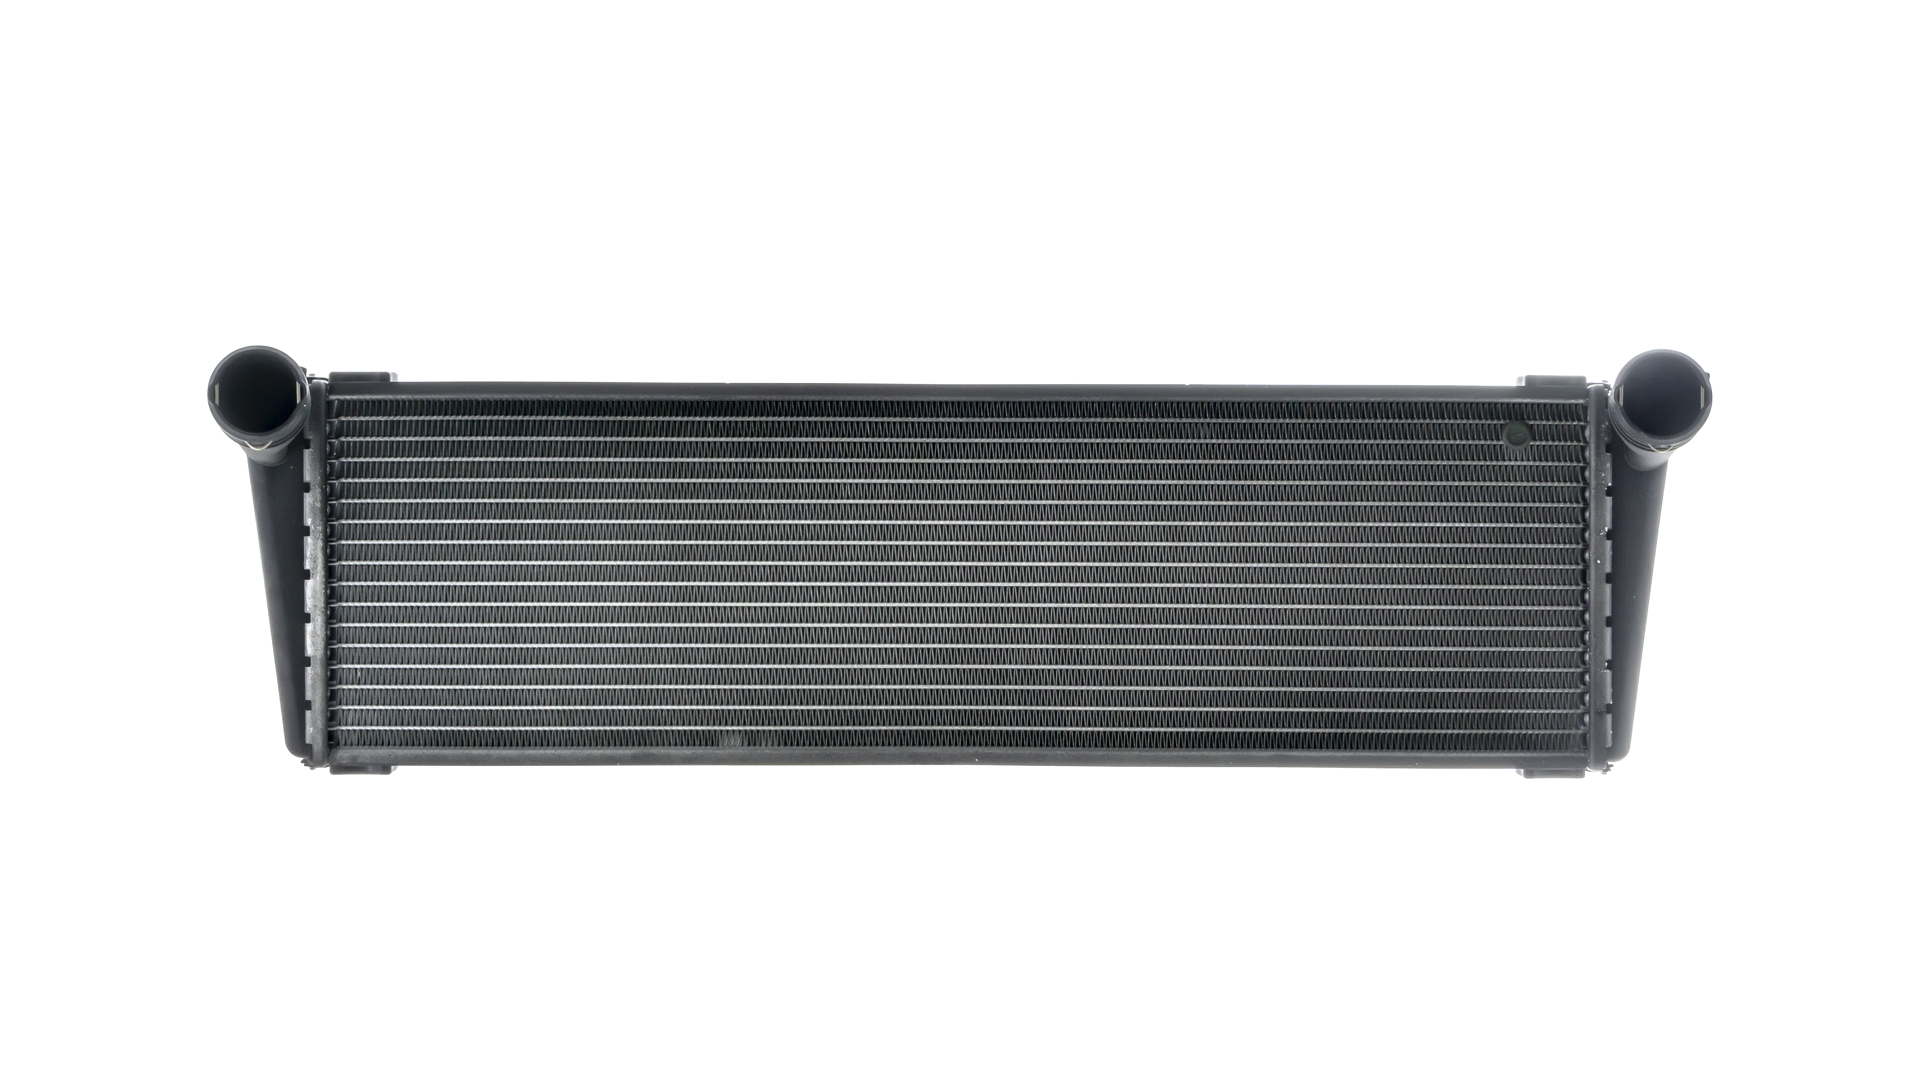 CR 1195 000P MAHLE ORIGINAL Radiators PORSCHE for vehicles with air conditioning, 608 x 168 x 44 mm, Manual Transmission, Brazed cooling fins